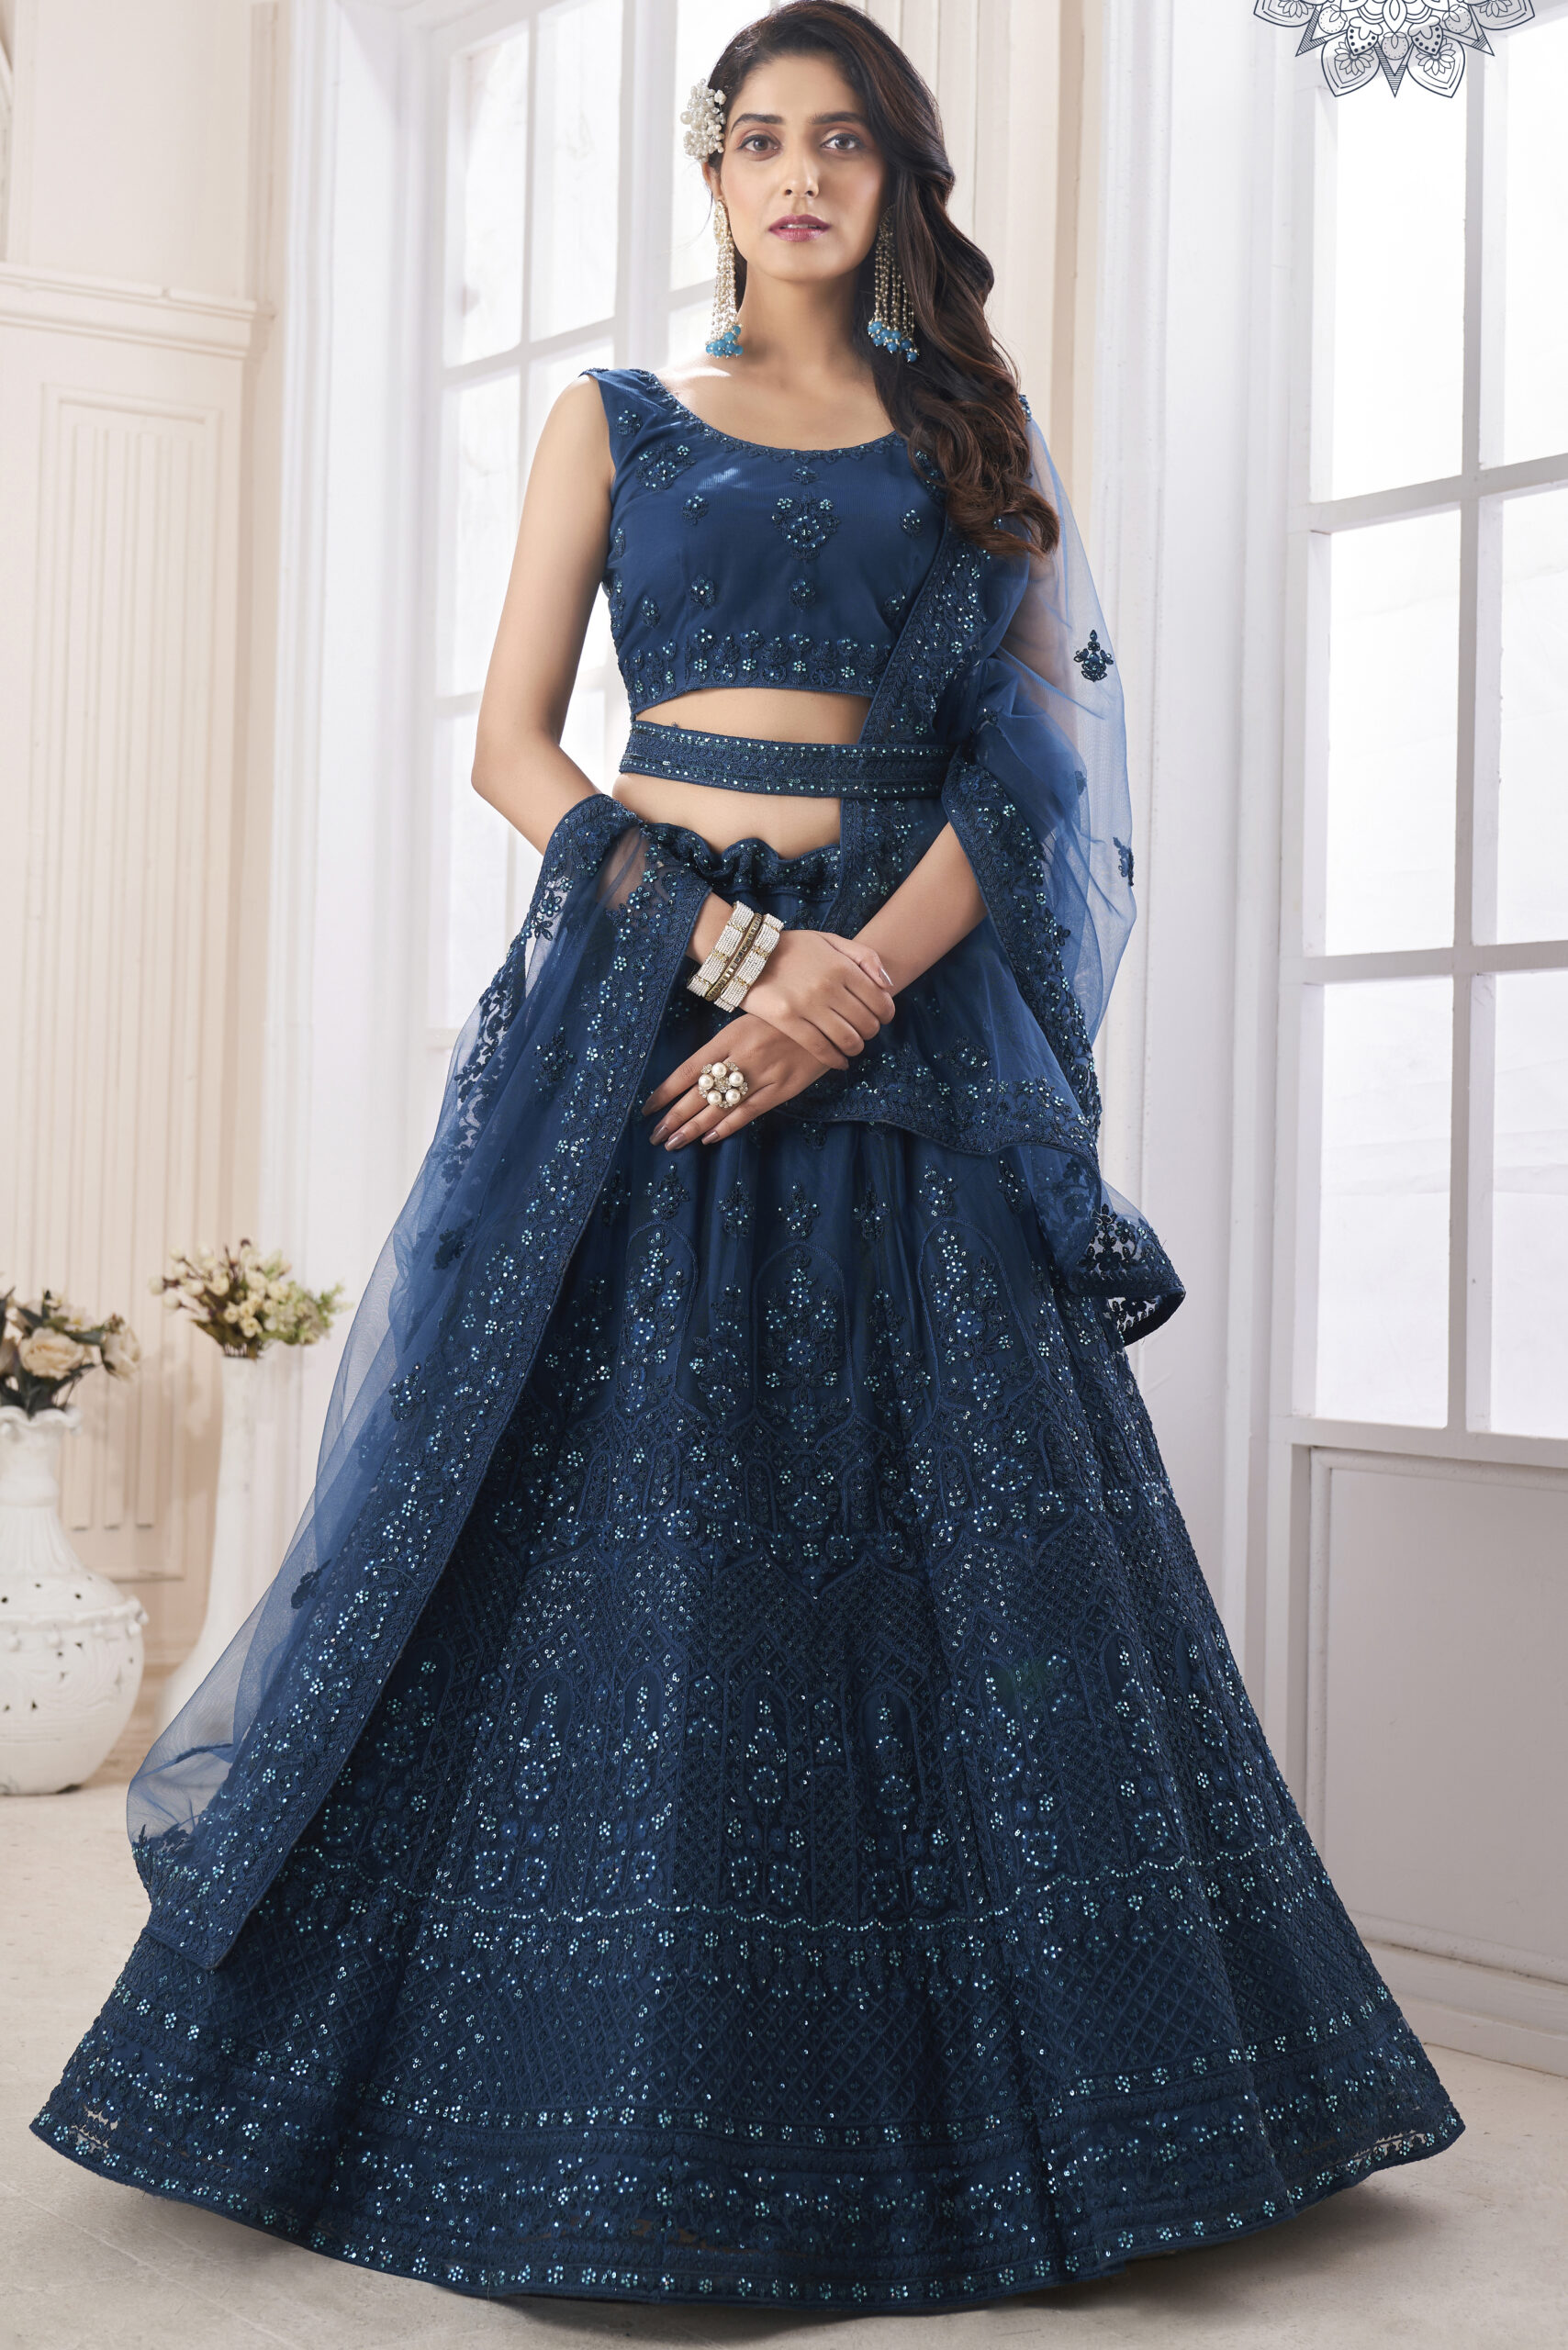 Buy Royal Blue Lehenga Choli In Raw Silk With Hand Embroidered Butti Design  Using Mint Sequins And Cut Dana Work Online - Kalki Fashion